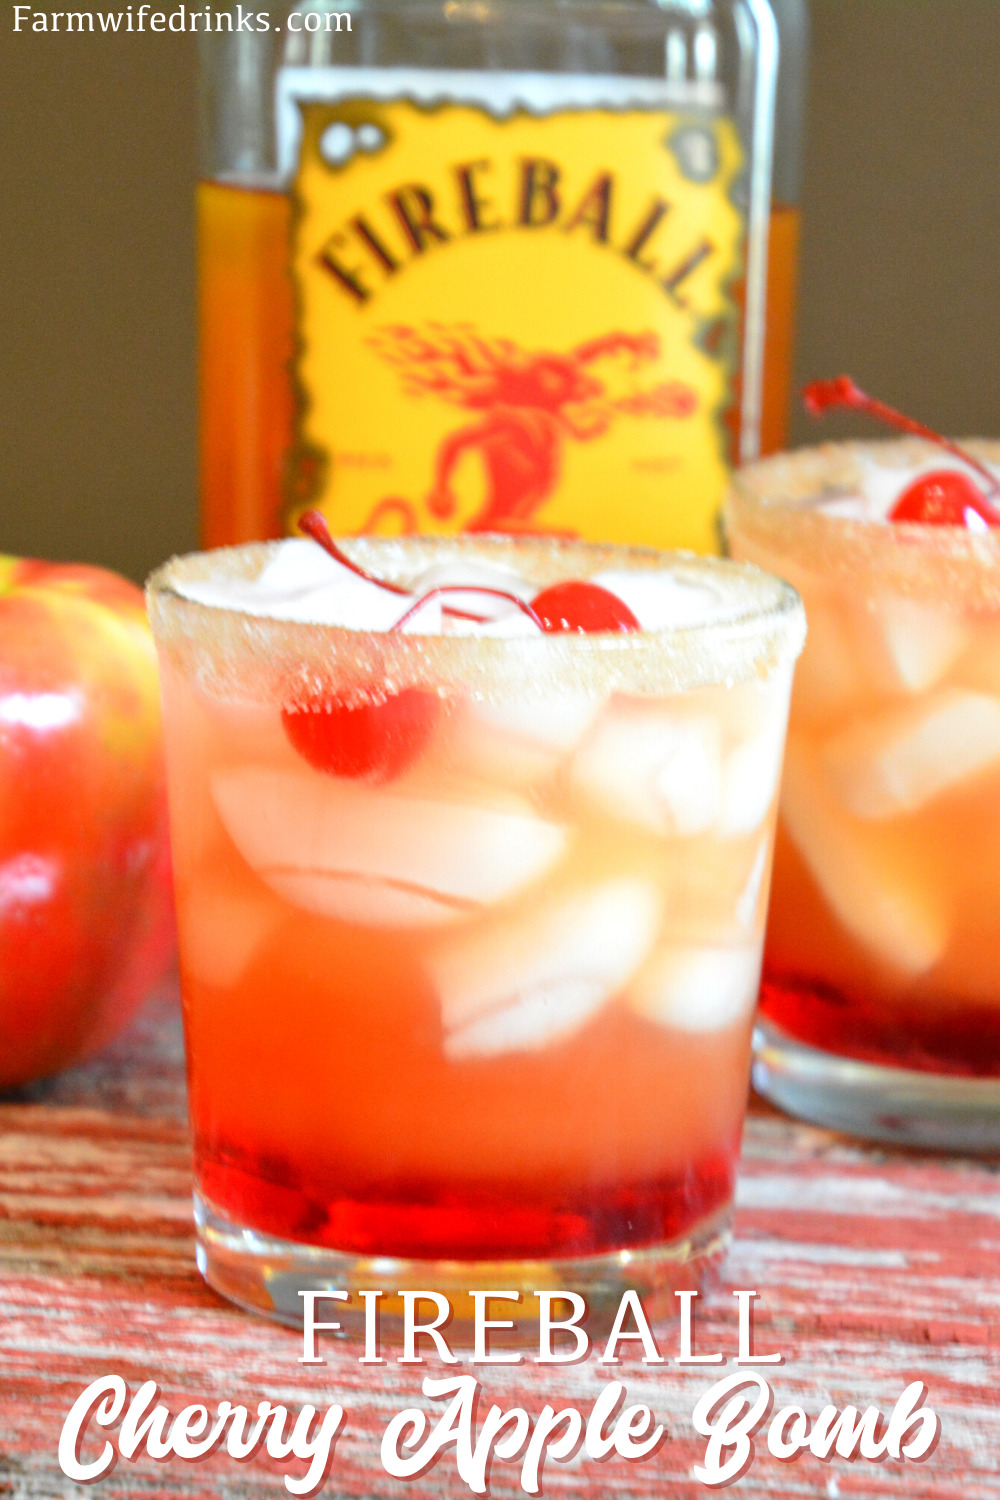 Fireball cherry apple bomb cocktail takes fall flavors up a notch with real apple cider and Fireball whisky with cherries and grenadine for the best-iced fall cocktail.